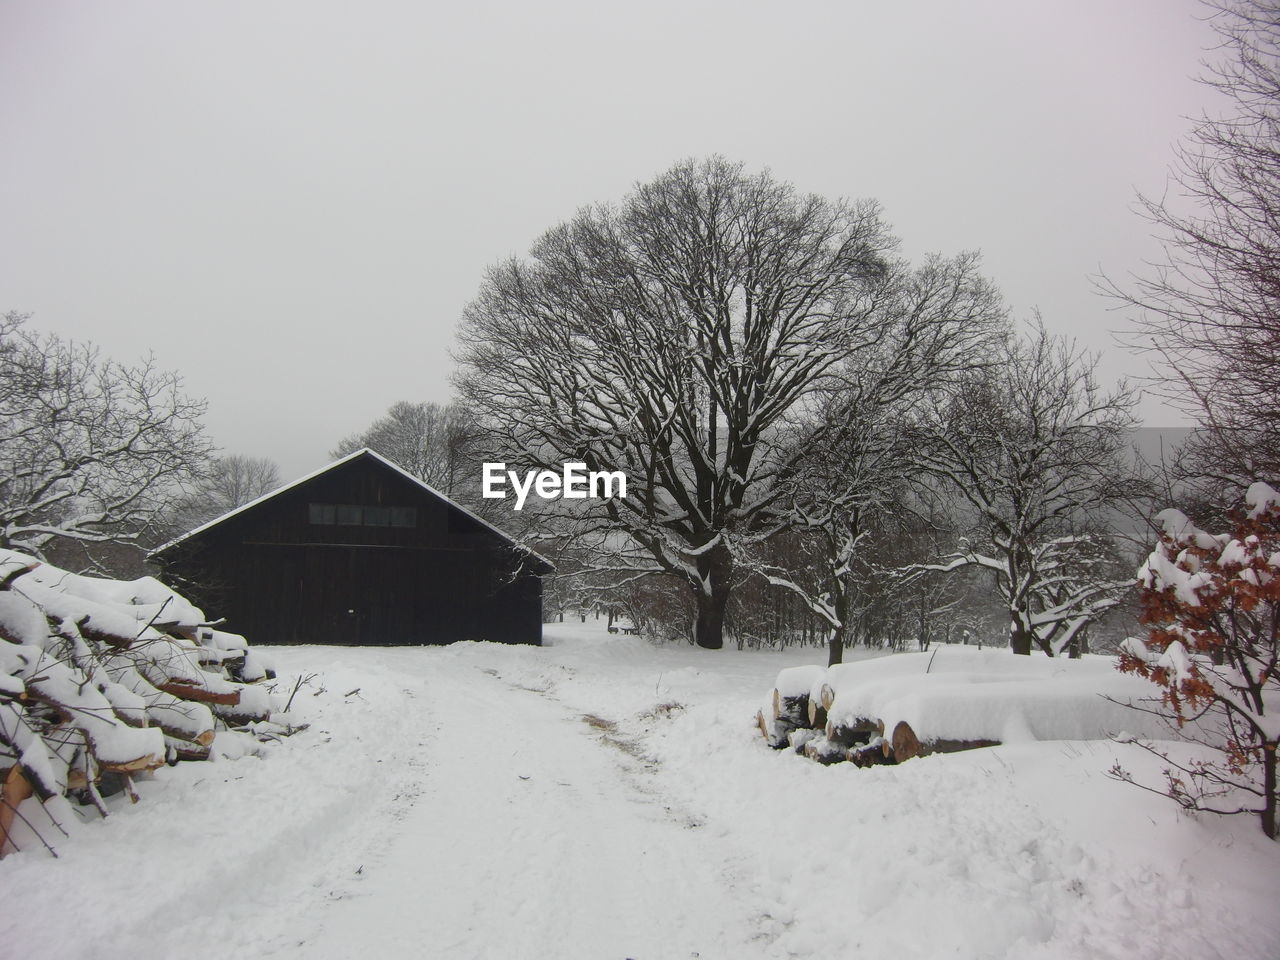 VIEW OF SNOW COVERED LANDSCAPE